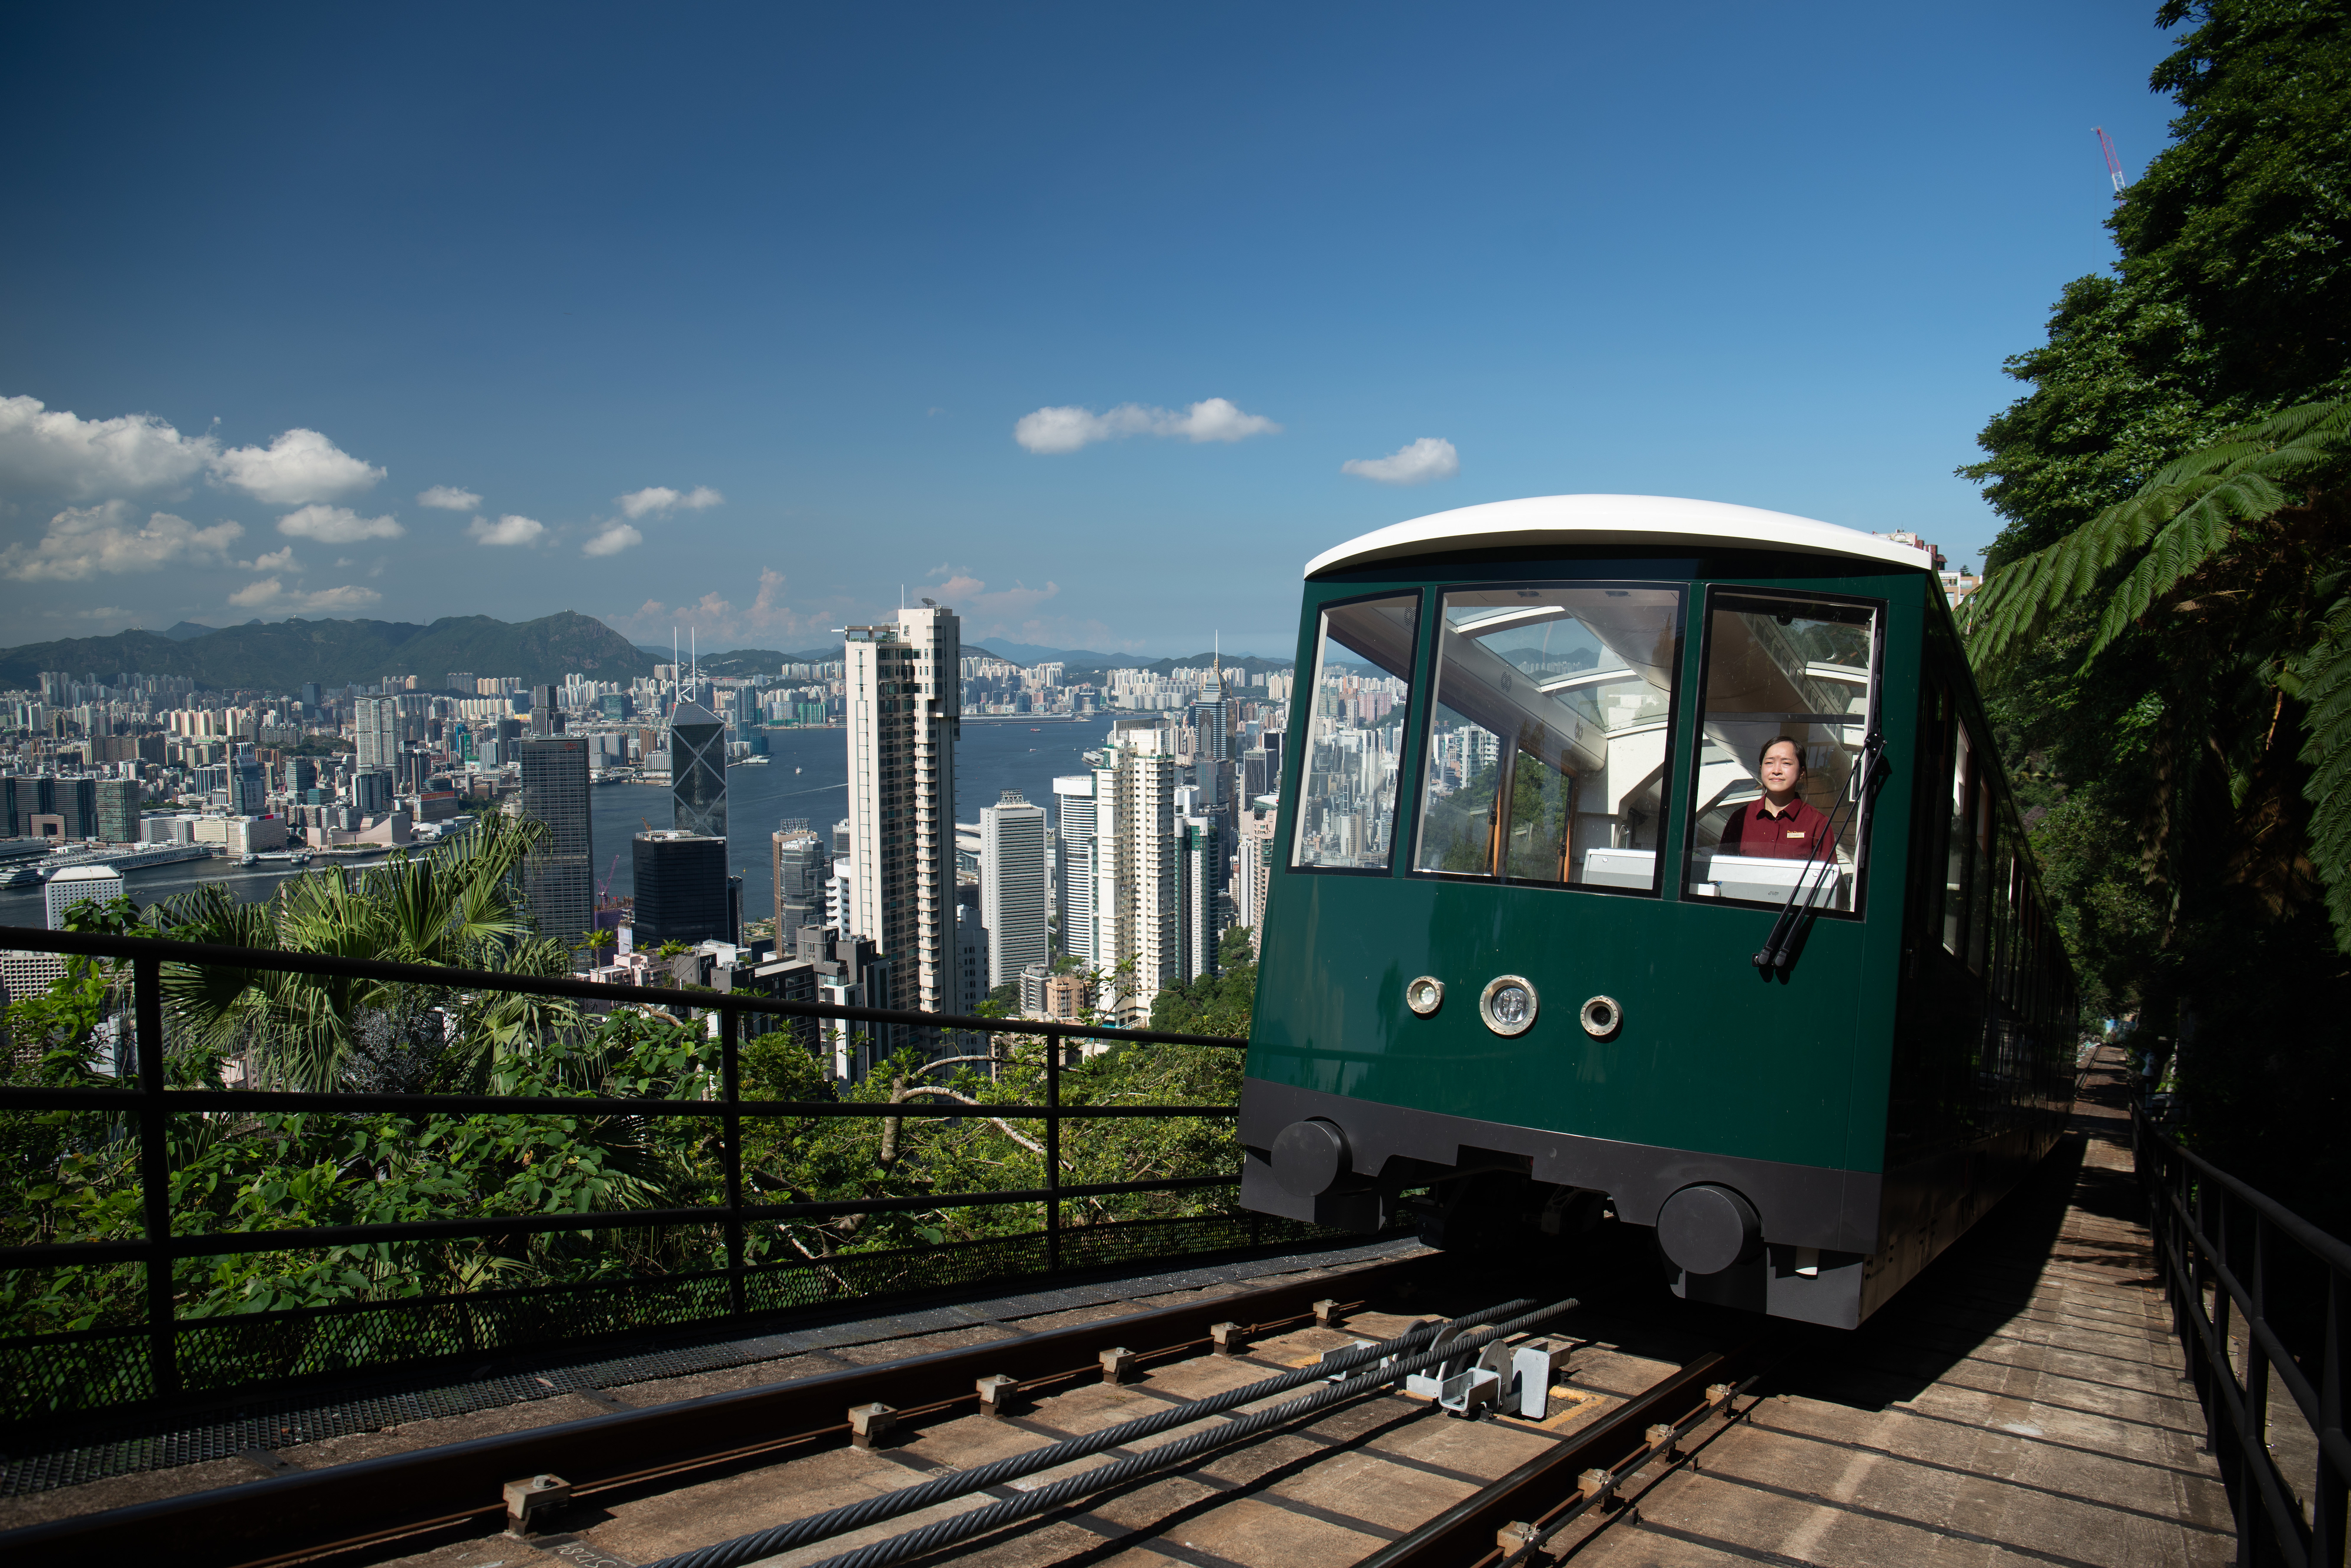 A tram on a steep track with a scenic view of a city skyline, with a person visible through the window